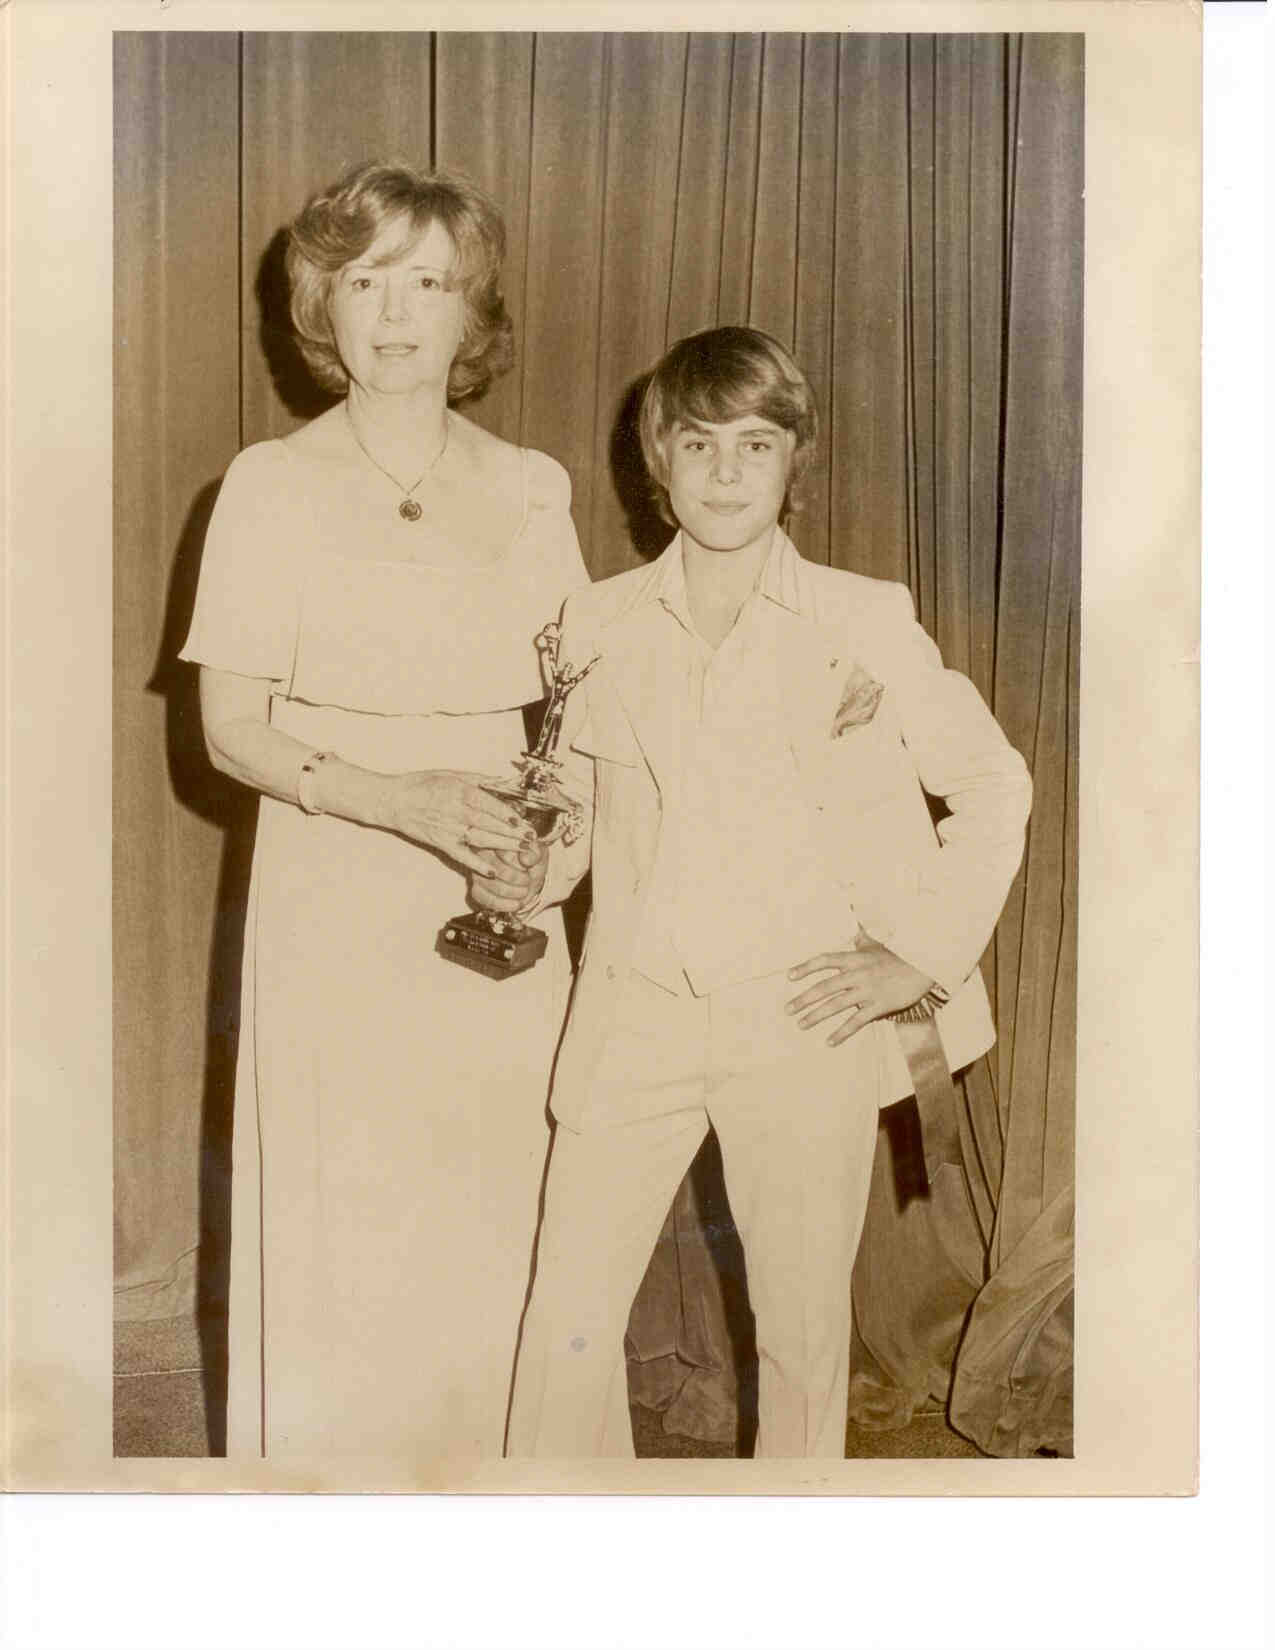 Augie Buttinelli with Gladys Davis of Cappa Chell Modeling, Washington DC at the Waldorf Astoria 1976 International Modeling Show 2 runner up pre-teen commercial